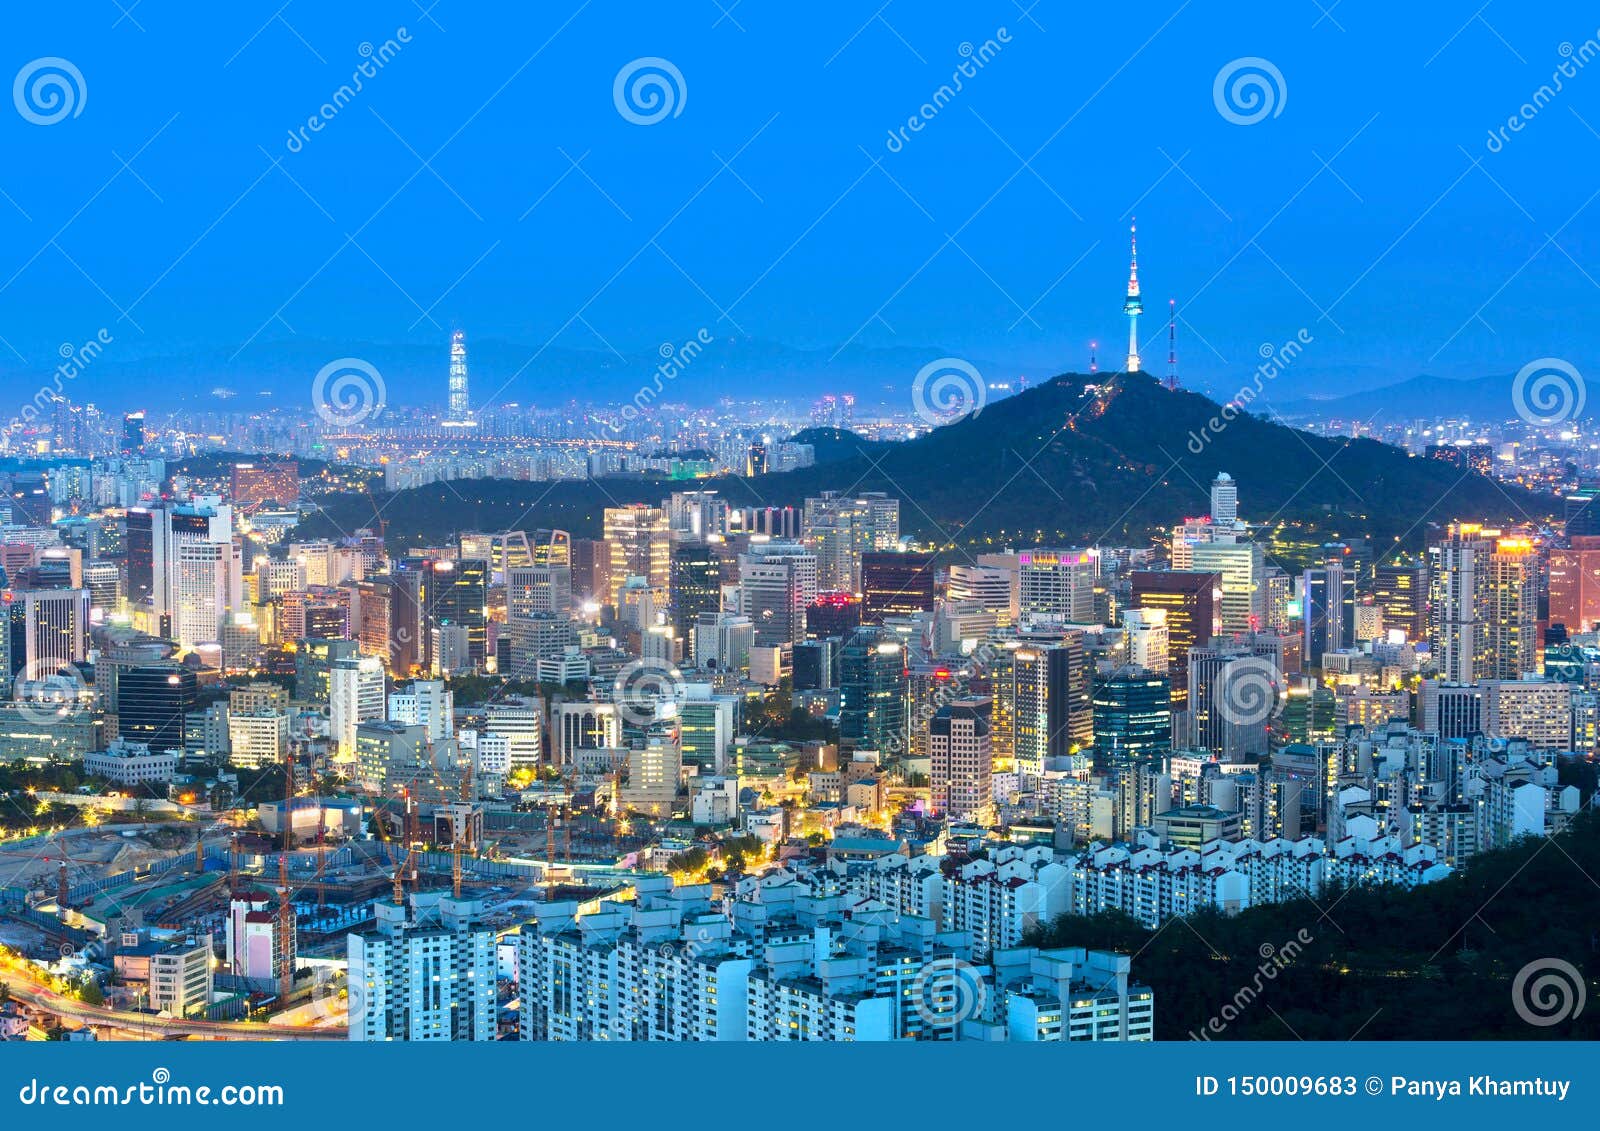 Seoul City and N Seoul Tower and Skyscrapers, Beautiful City at Night ...